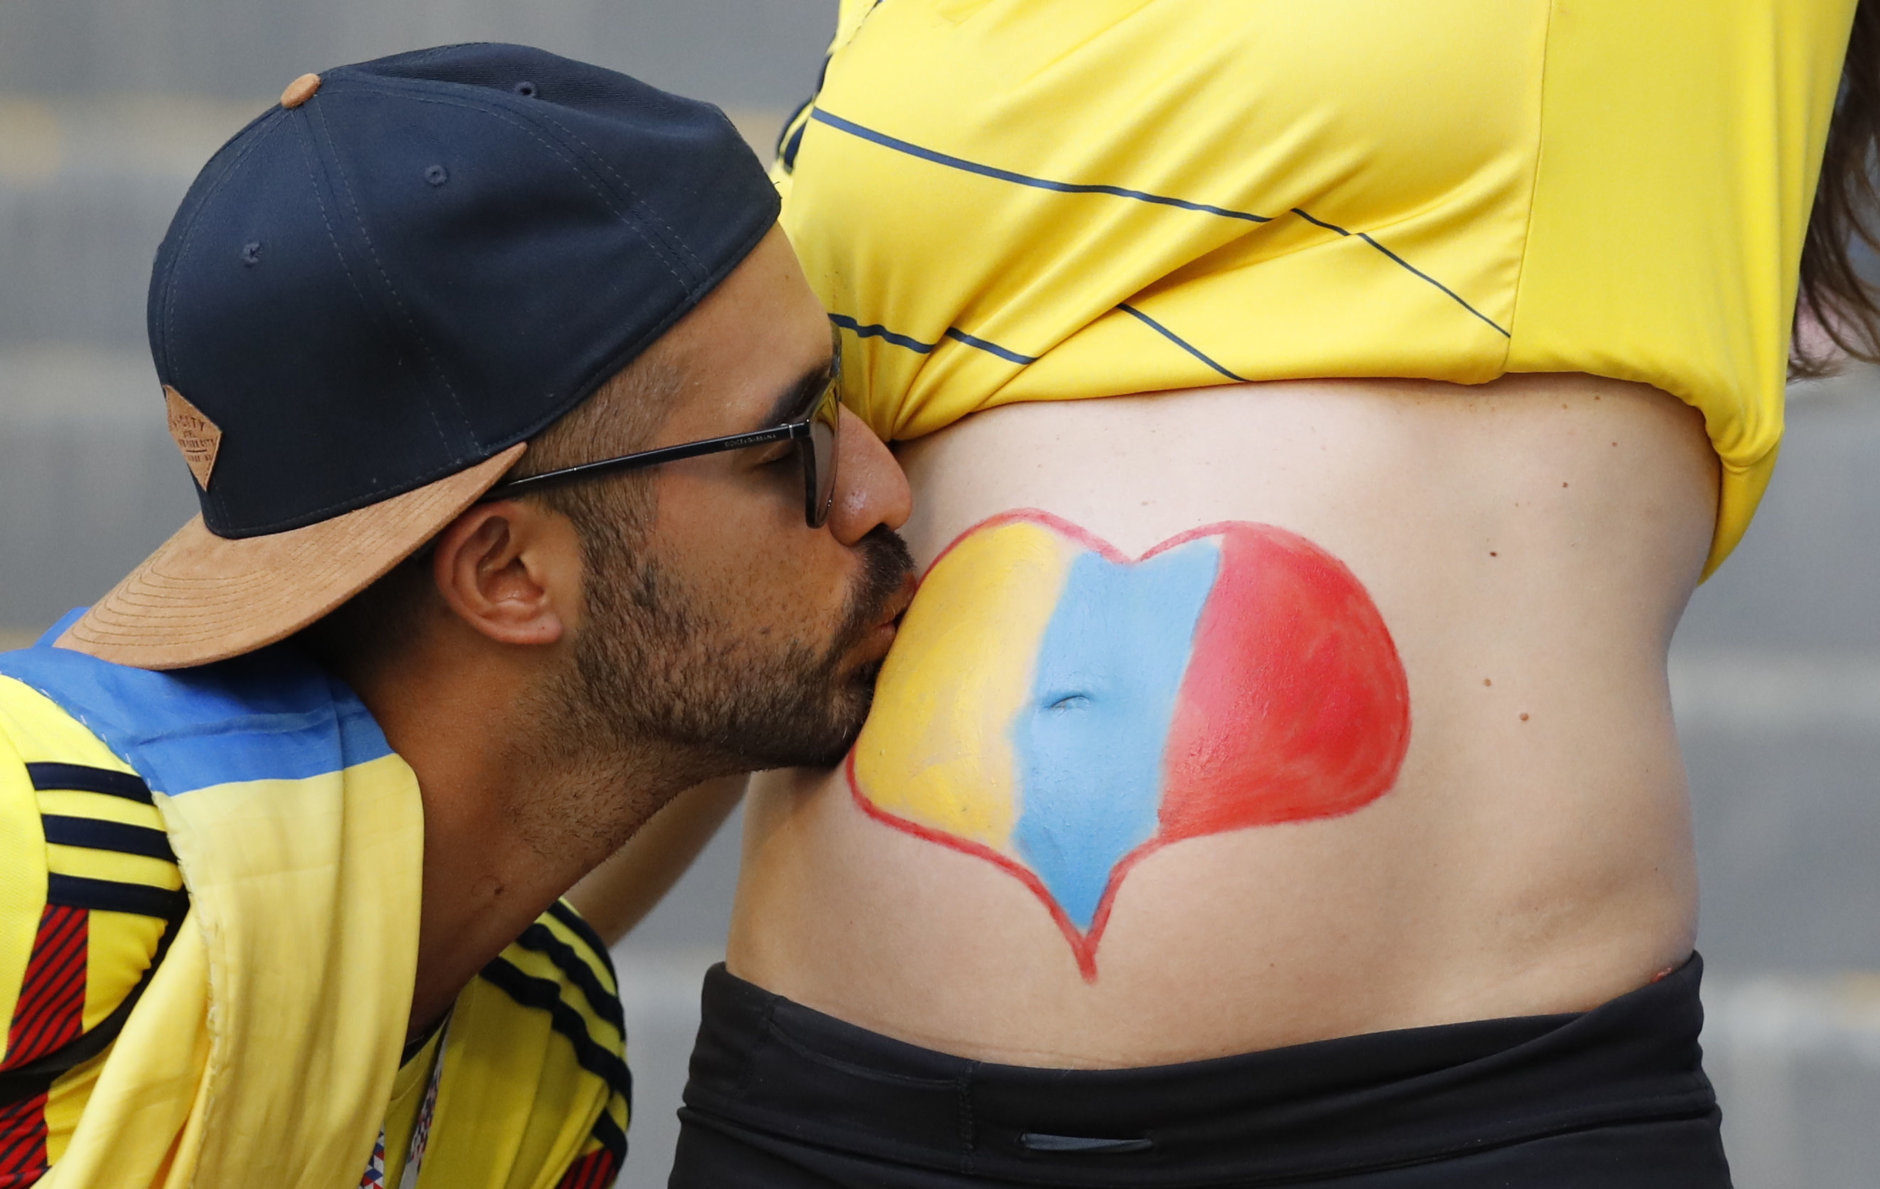 A Columbian supporter kisses the belly of a pregnant woman prior to during the group H match between Senegal and Colombia, at the 2018 soccer World Cup in the Samara Arena in Samara, Russia, Thursday, June 28, 2018. (AP Photo/Efrem Lukatsky)